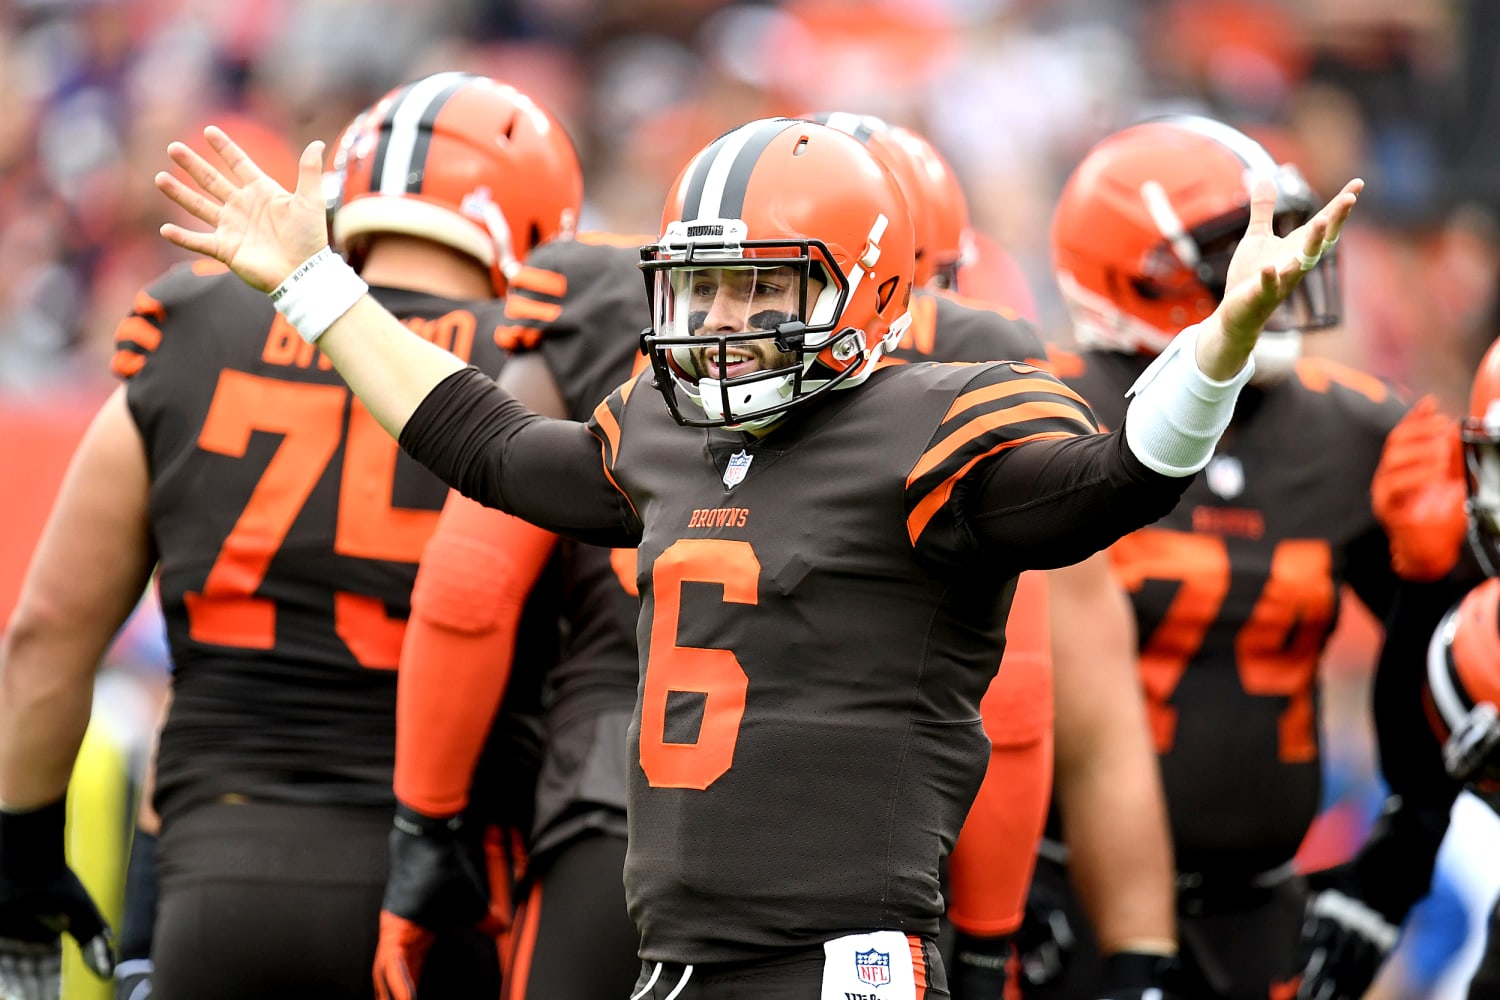 Like the Cleveland Browns, NFL ratings are beating expectations